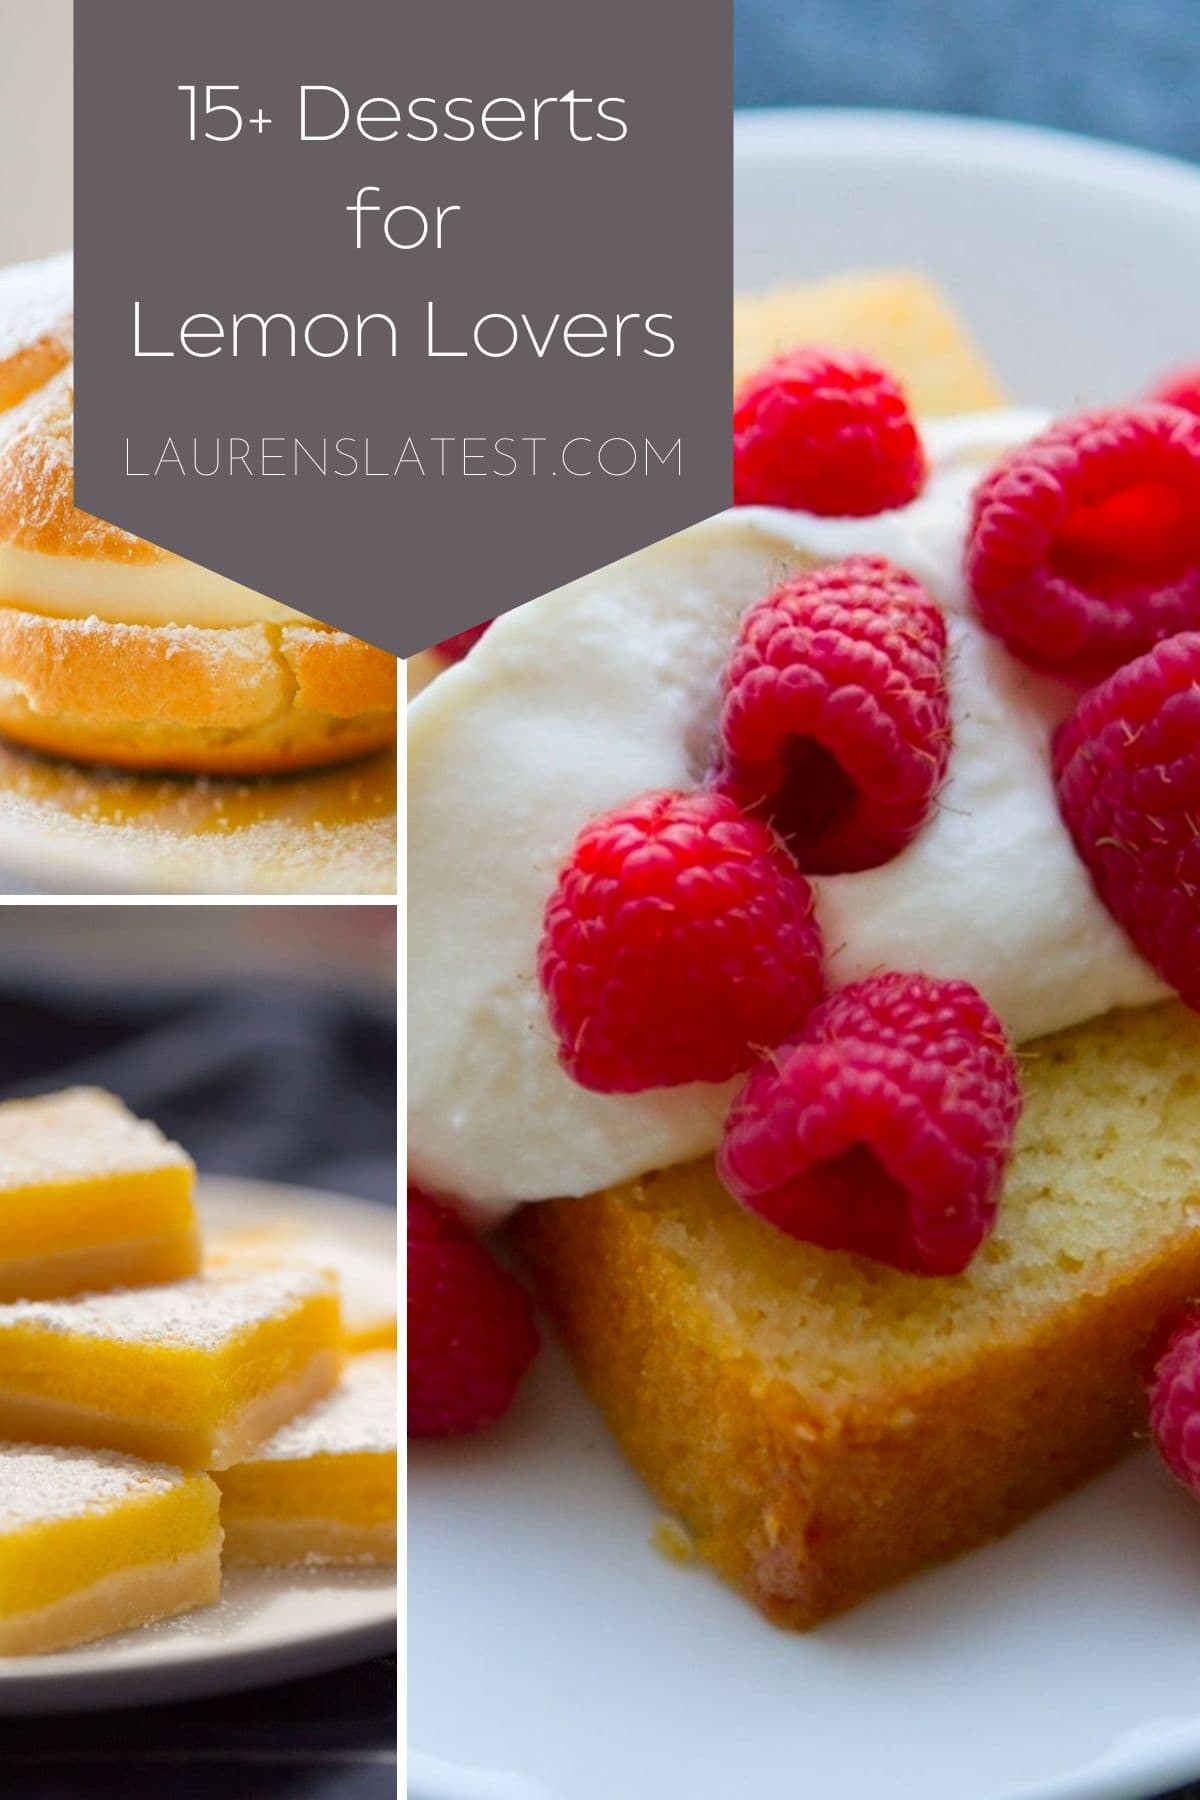 15+ desserts for lemon lovers collage of three lemon desserts with text